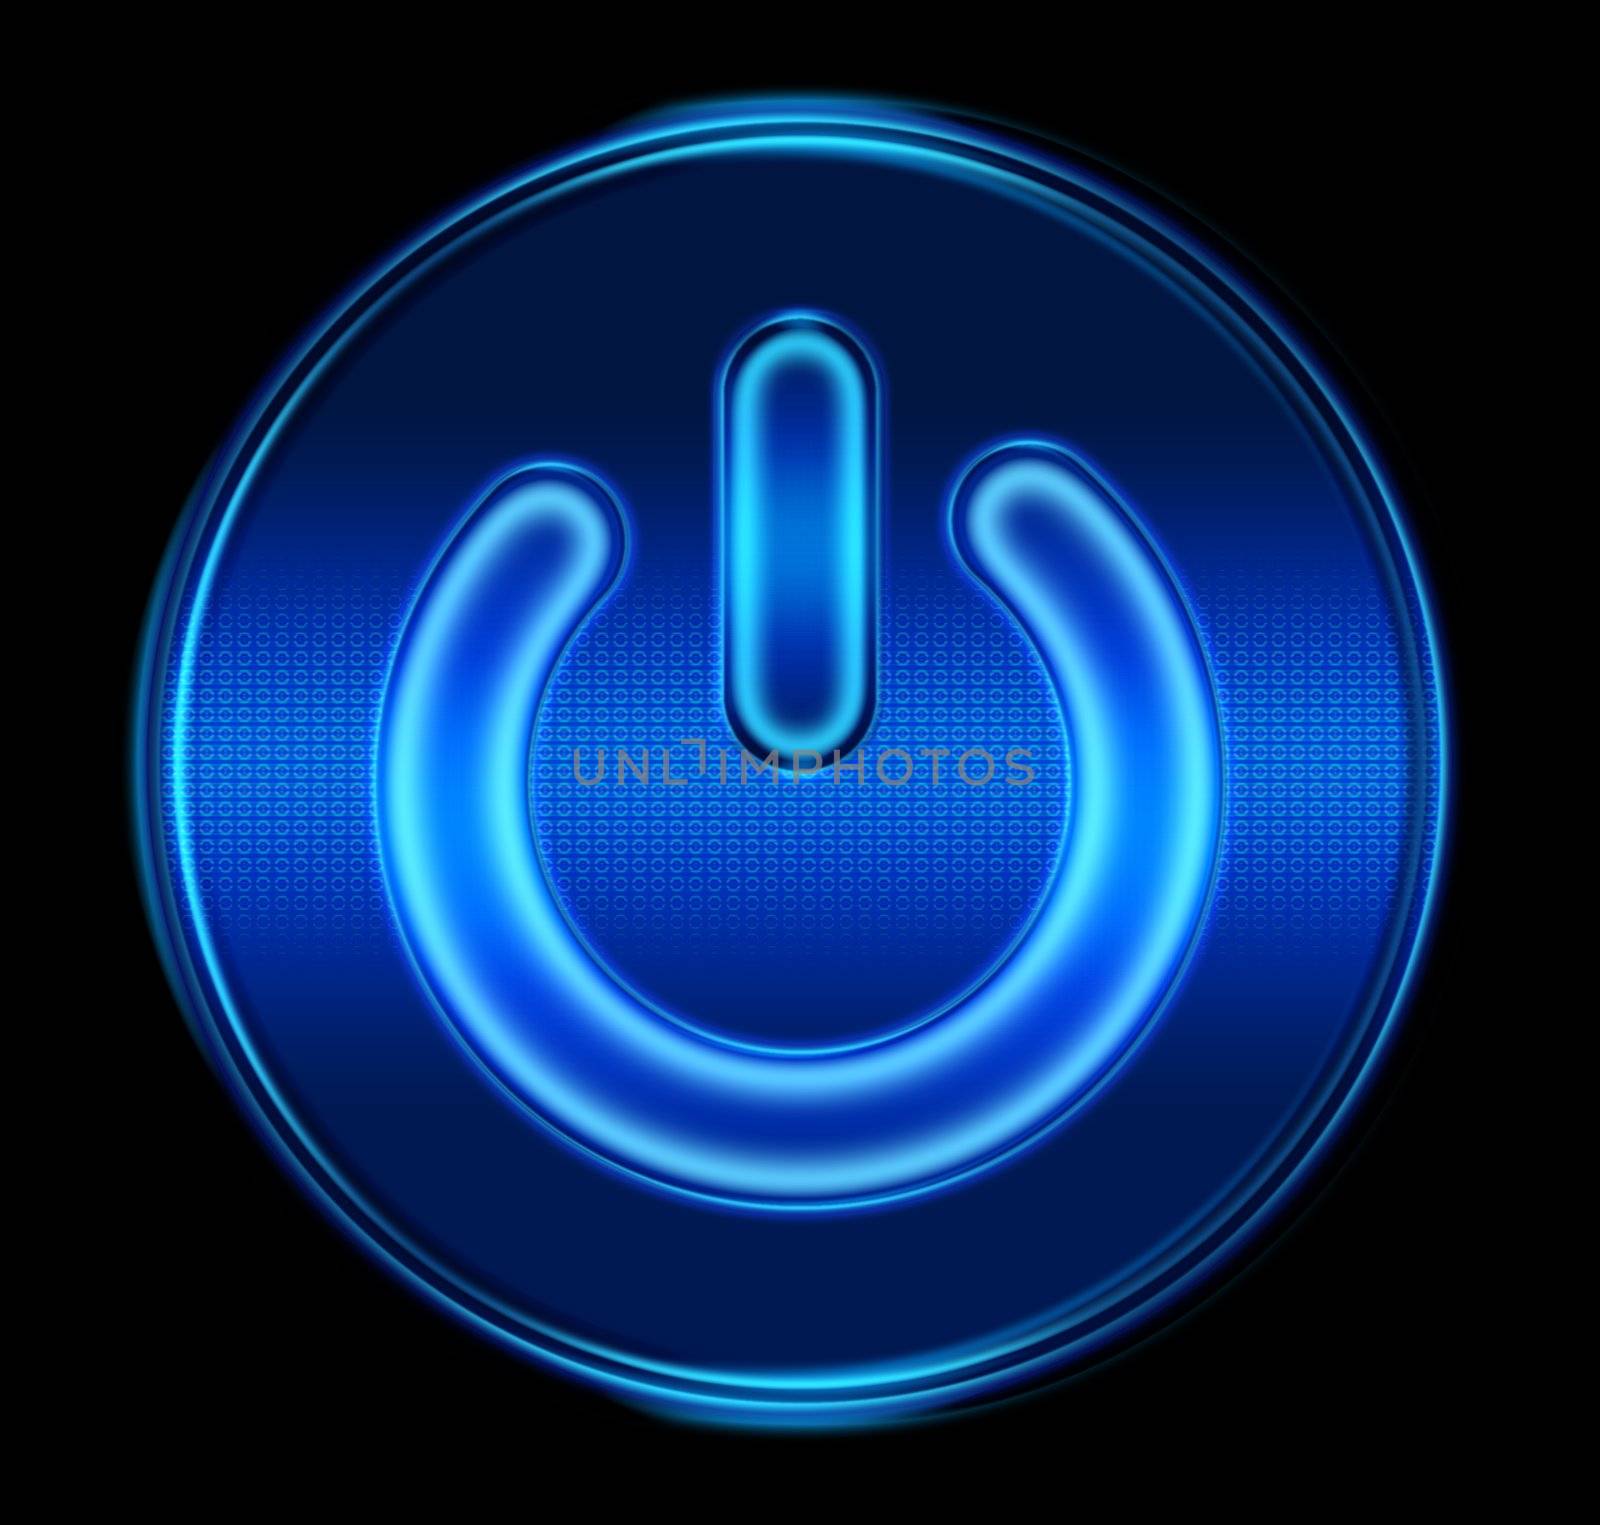 power button icon, isolated on black background by zeffss